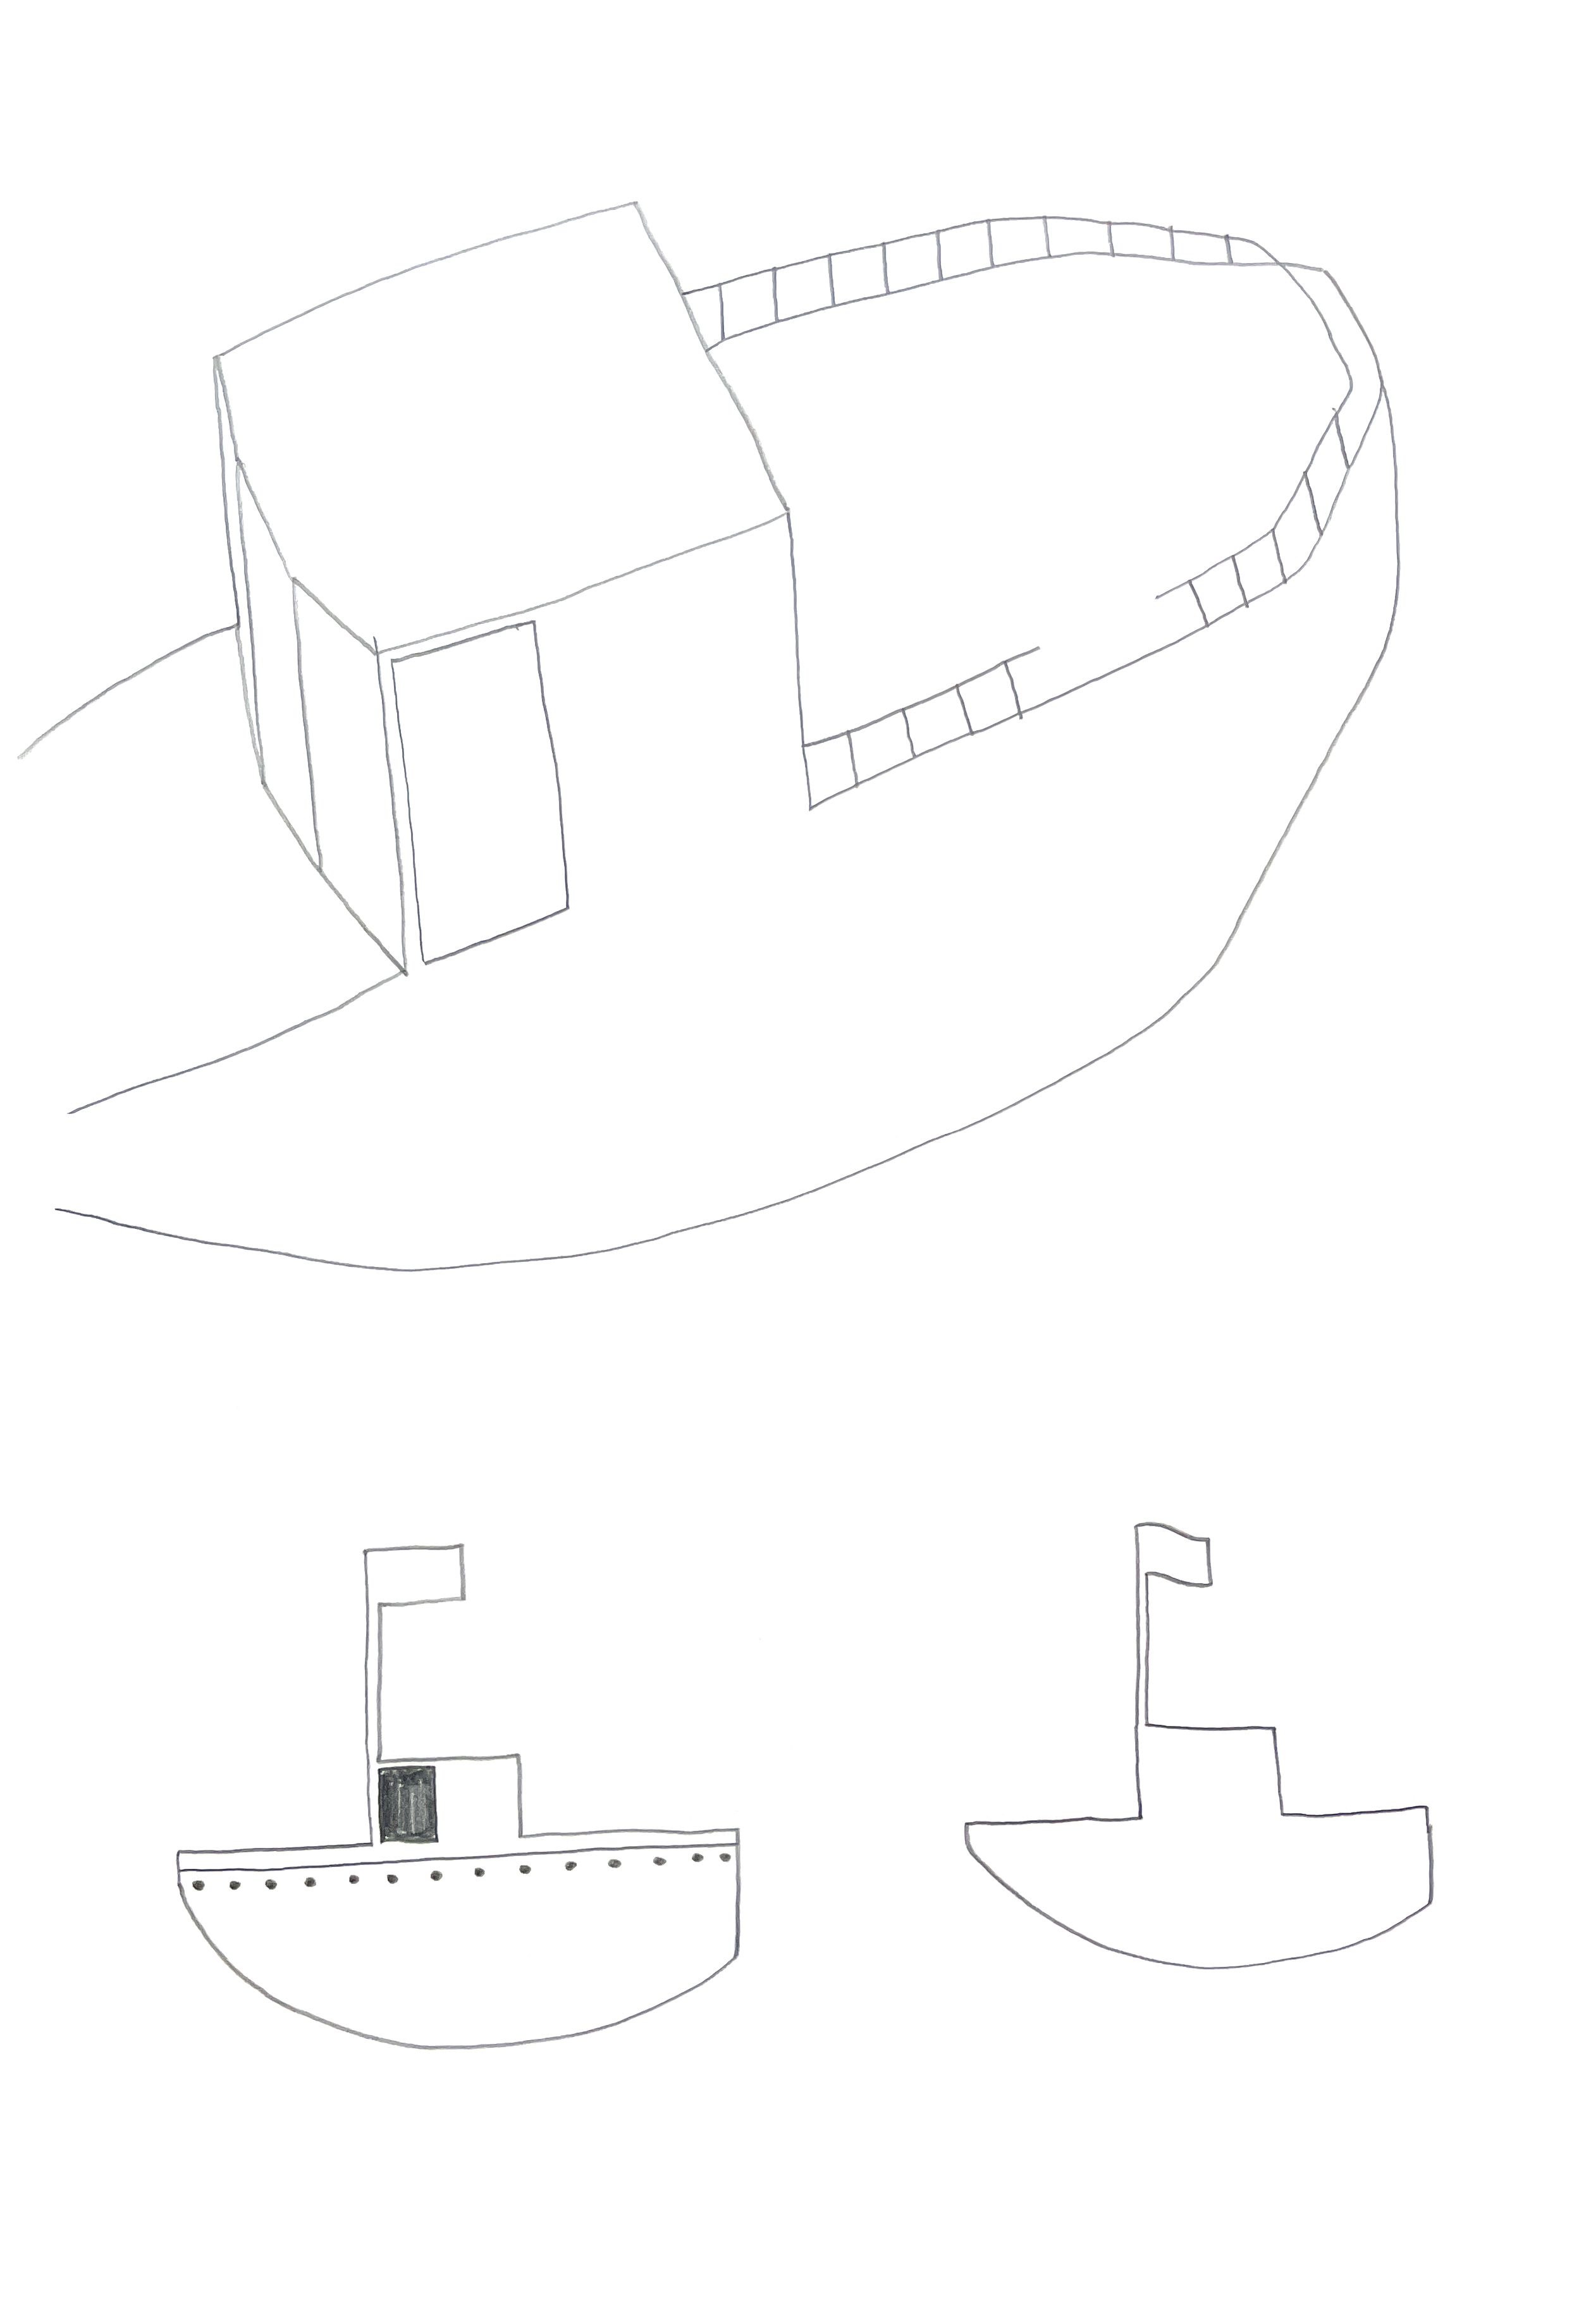 axonometric pencil drawing of a boat with two smaller boats in profile below